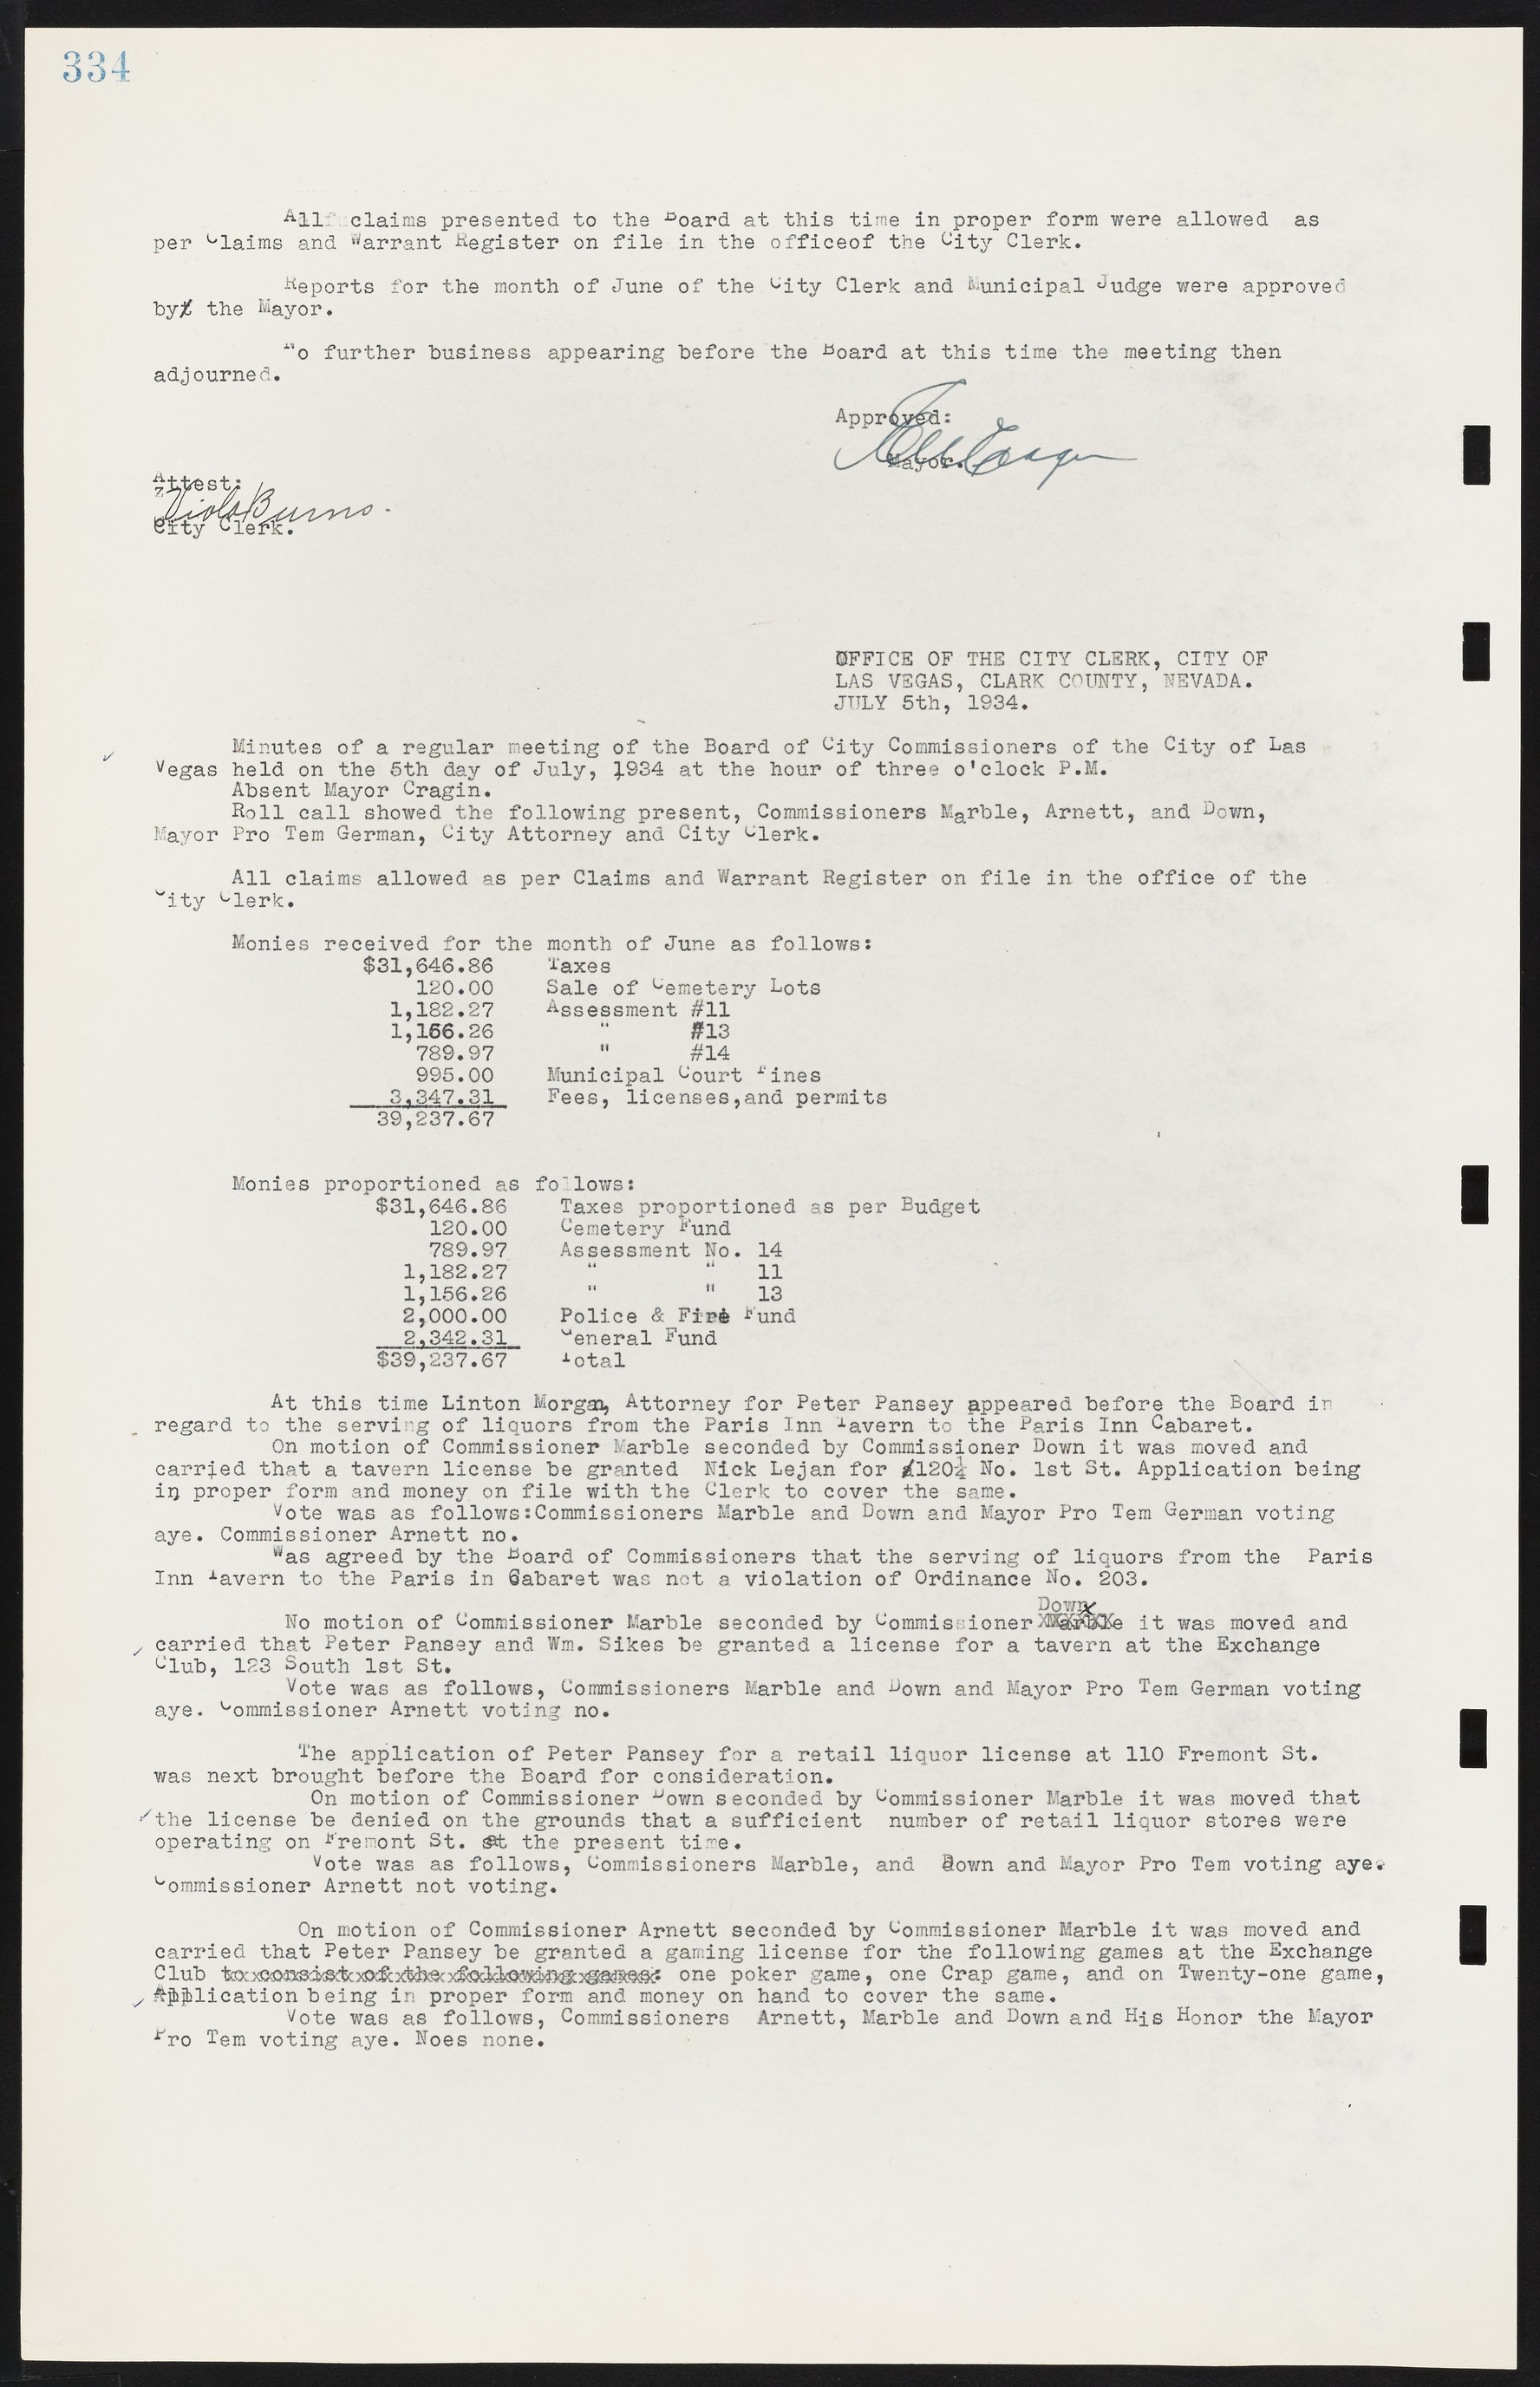 Las Vegas City Commission Minutes, May 14, 1929 to February 11, 1937, lvc000003-341